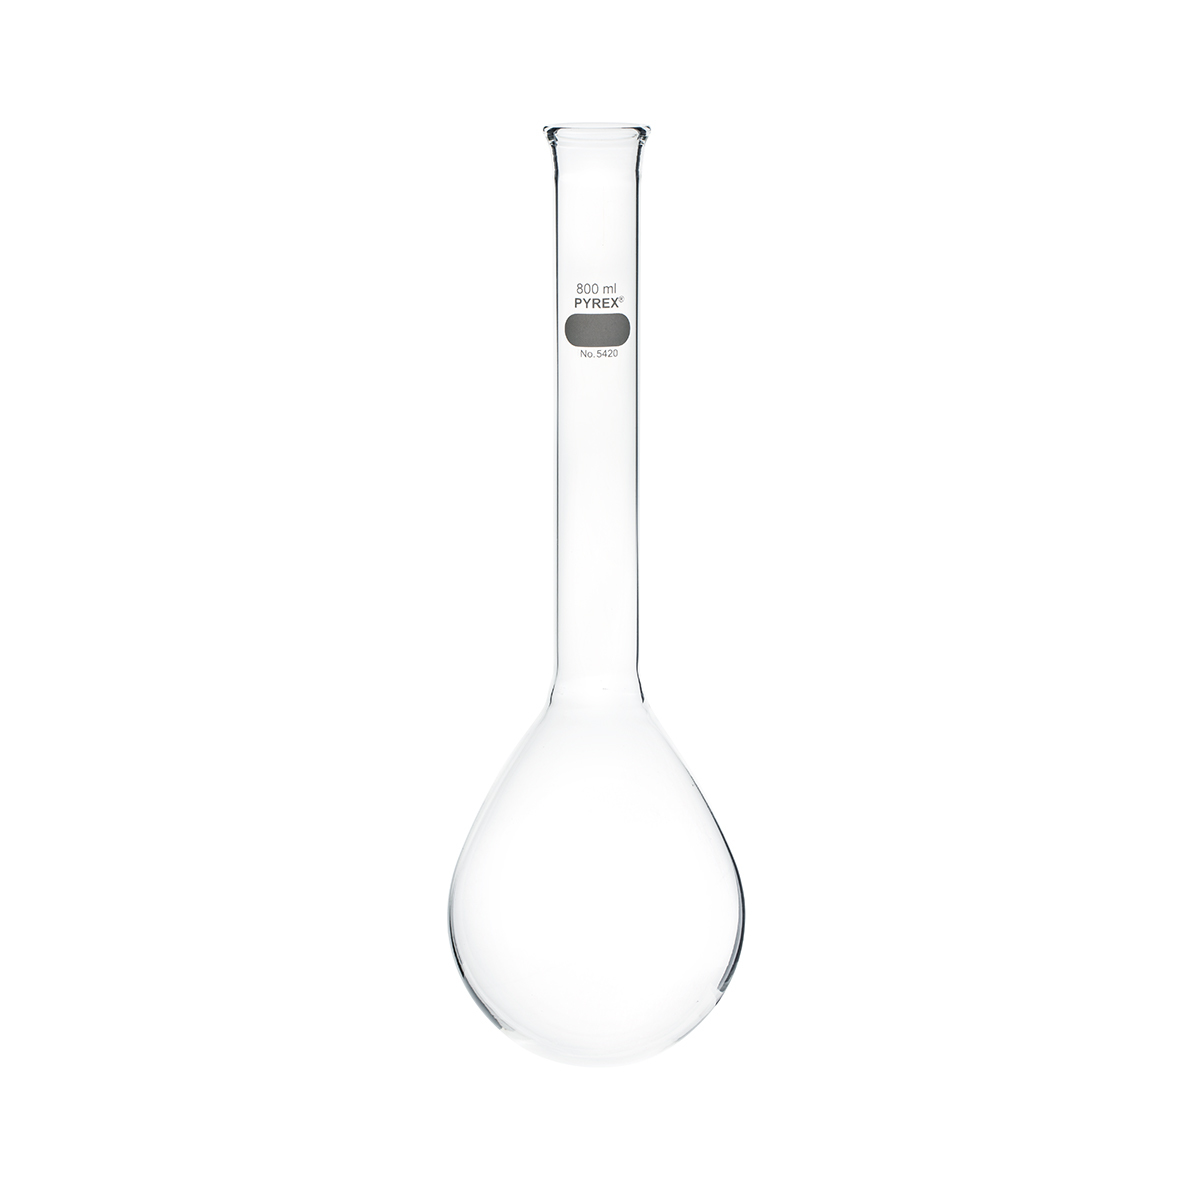 Pyrex™ Borosilicate Glass Cylindrical Reaction Vessel with